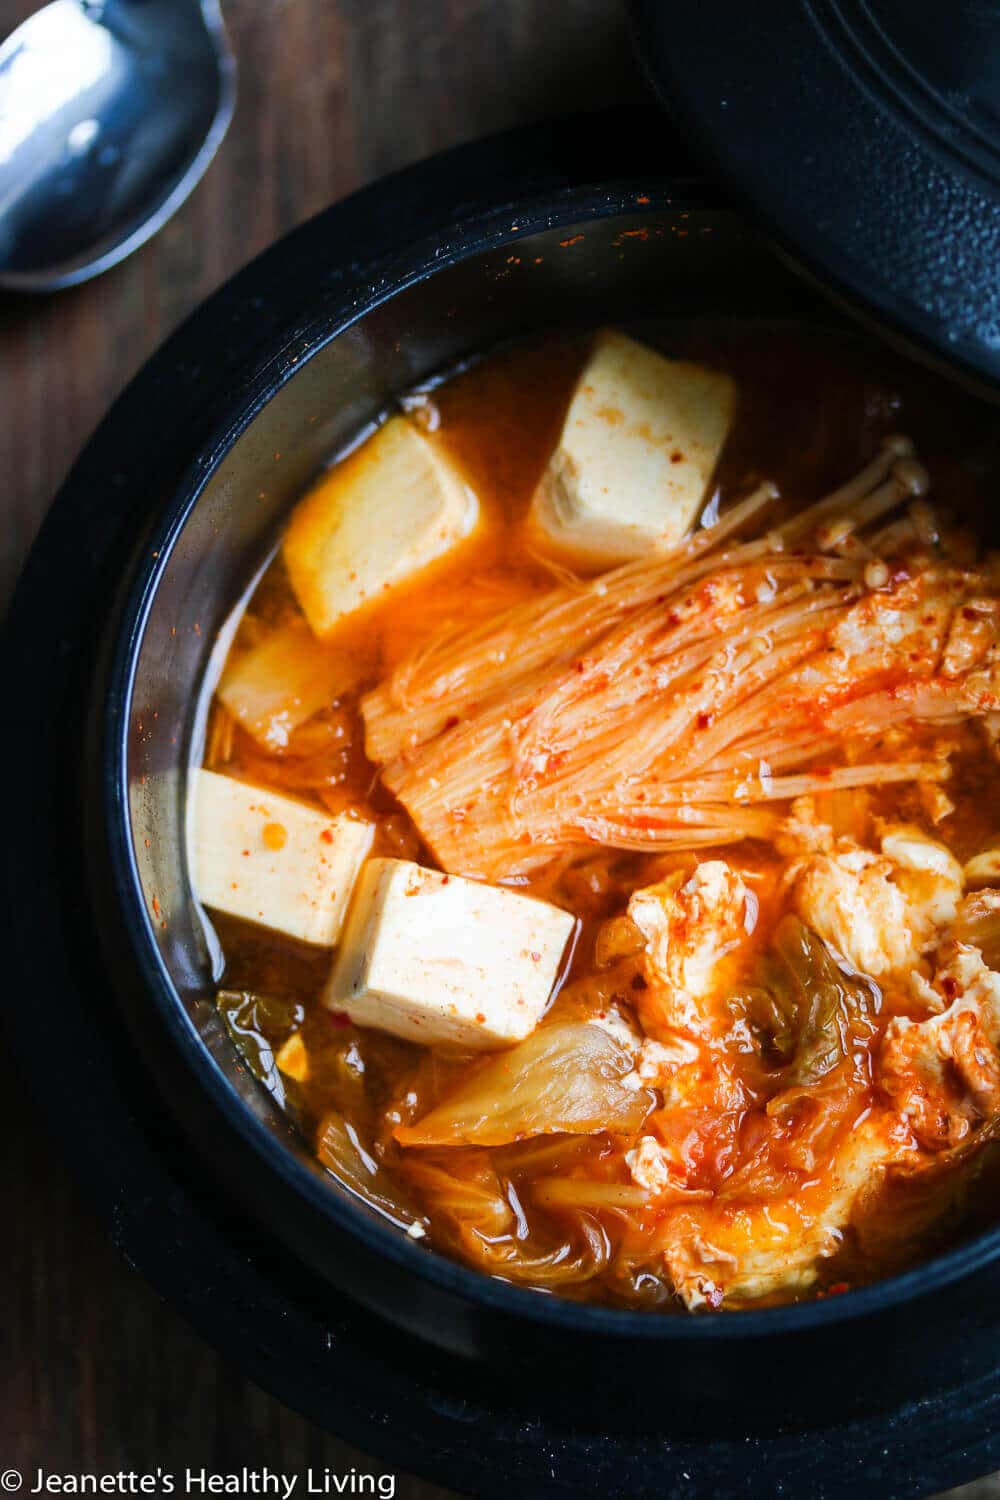 Spicy Kimchi Tofu Mushroom Egg Soup - this spicy vegetarian soup is healthy bowl of comfort on a cold winter day